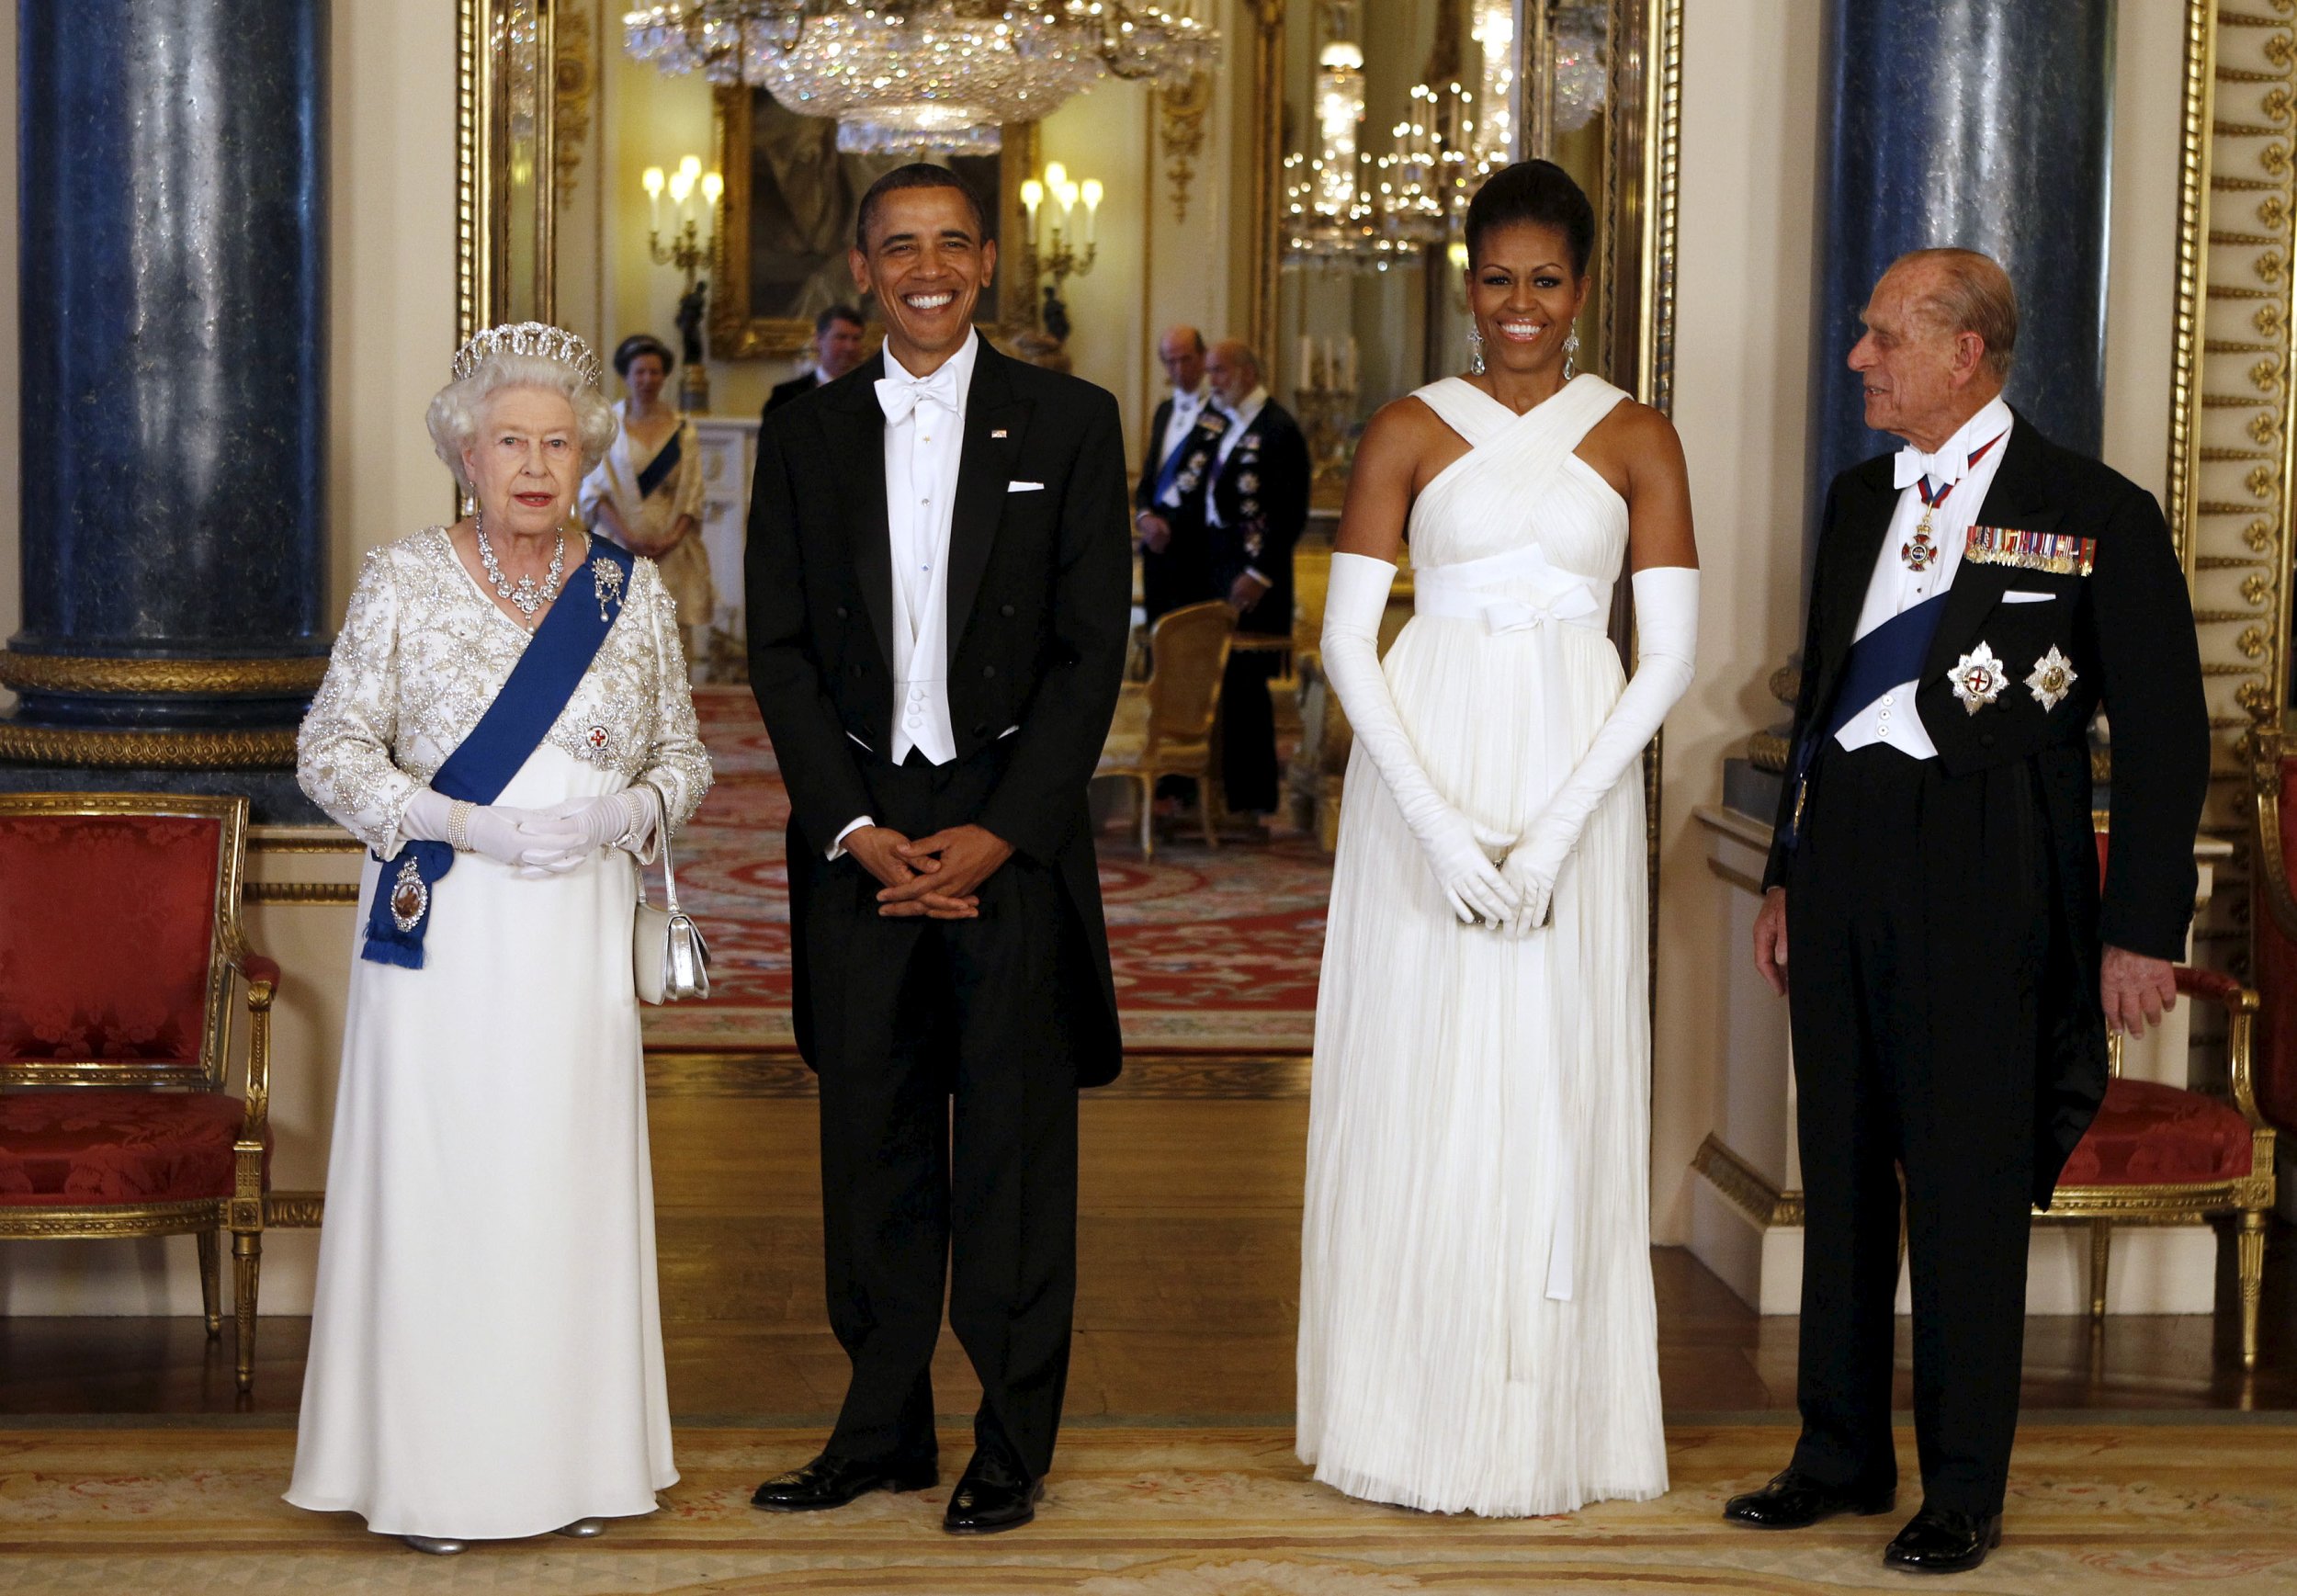 U.S. President Barack Obama 2nd L and first lady Michelle Obama 2nd R pose with Queen Elizabeth and Prince Phillip, Duke of Edinburgh 